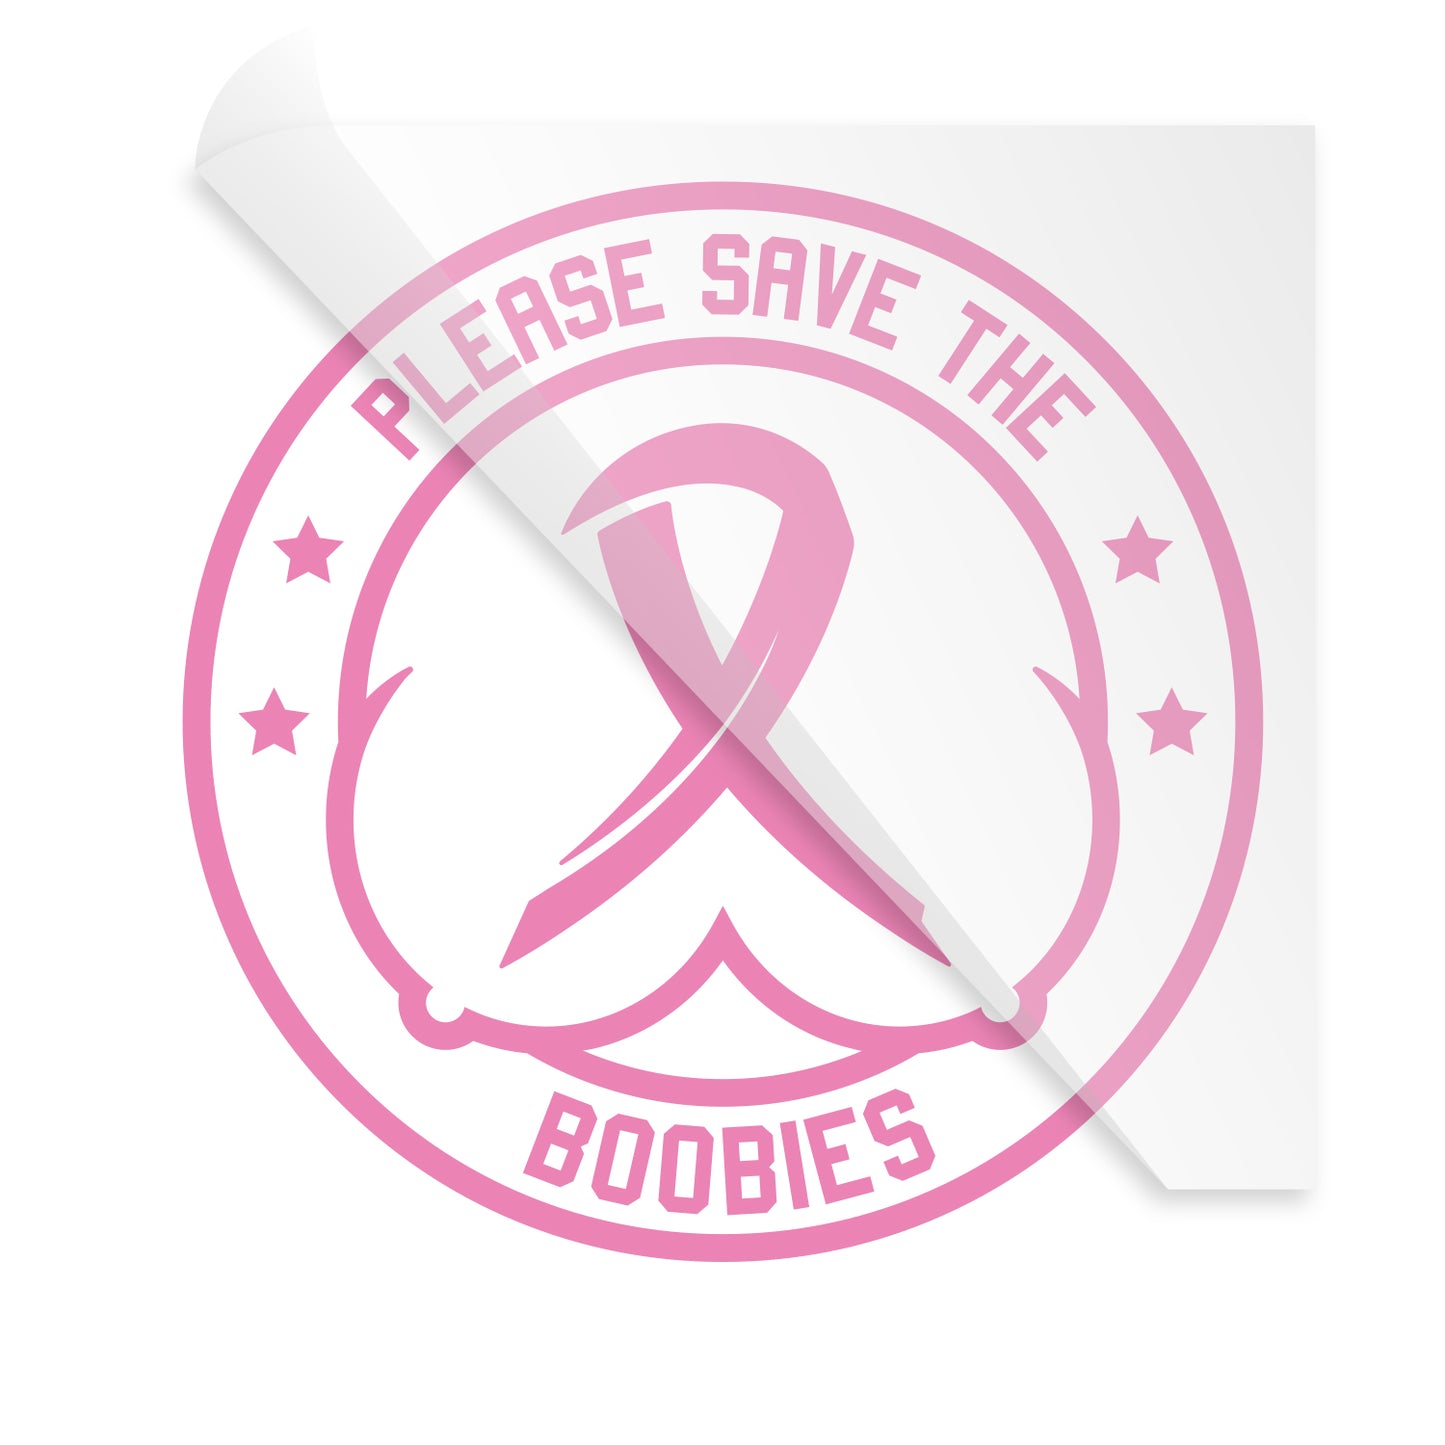 Please Save The Boobies Breast Cancer Awareness Heat Transfer